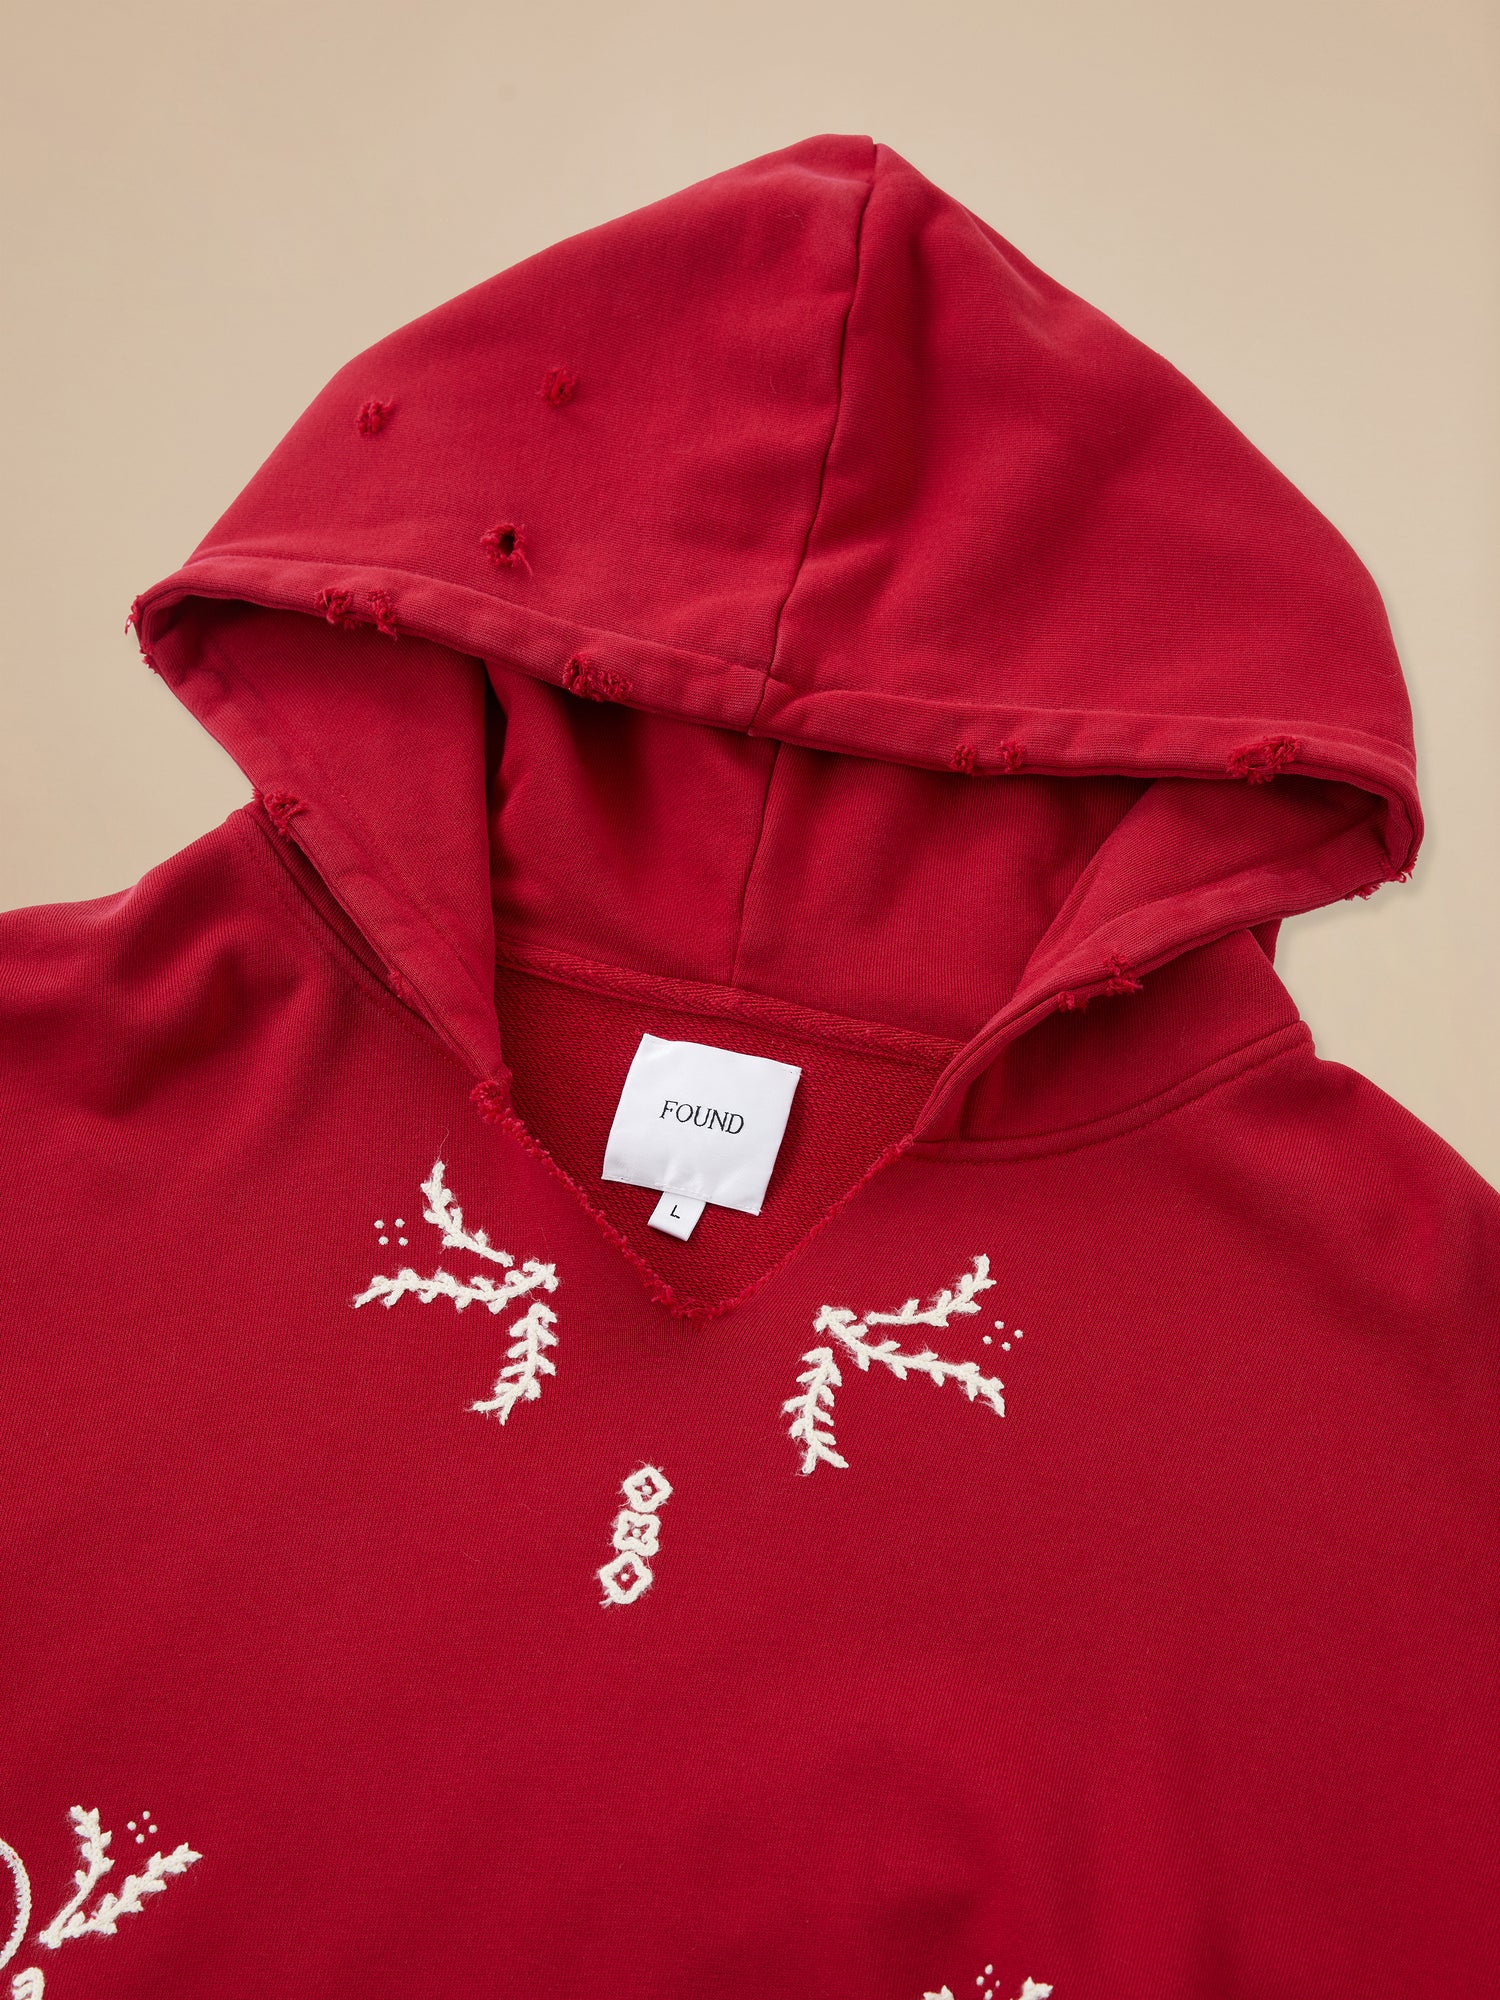 A Phulkari Embroidered Hoodie by Found, with red color and white embroidery on it.